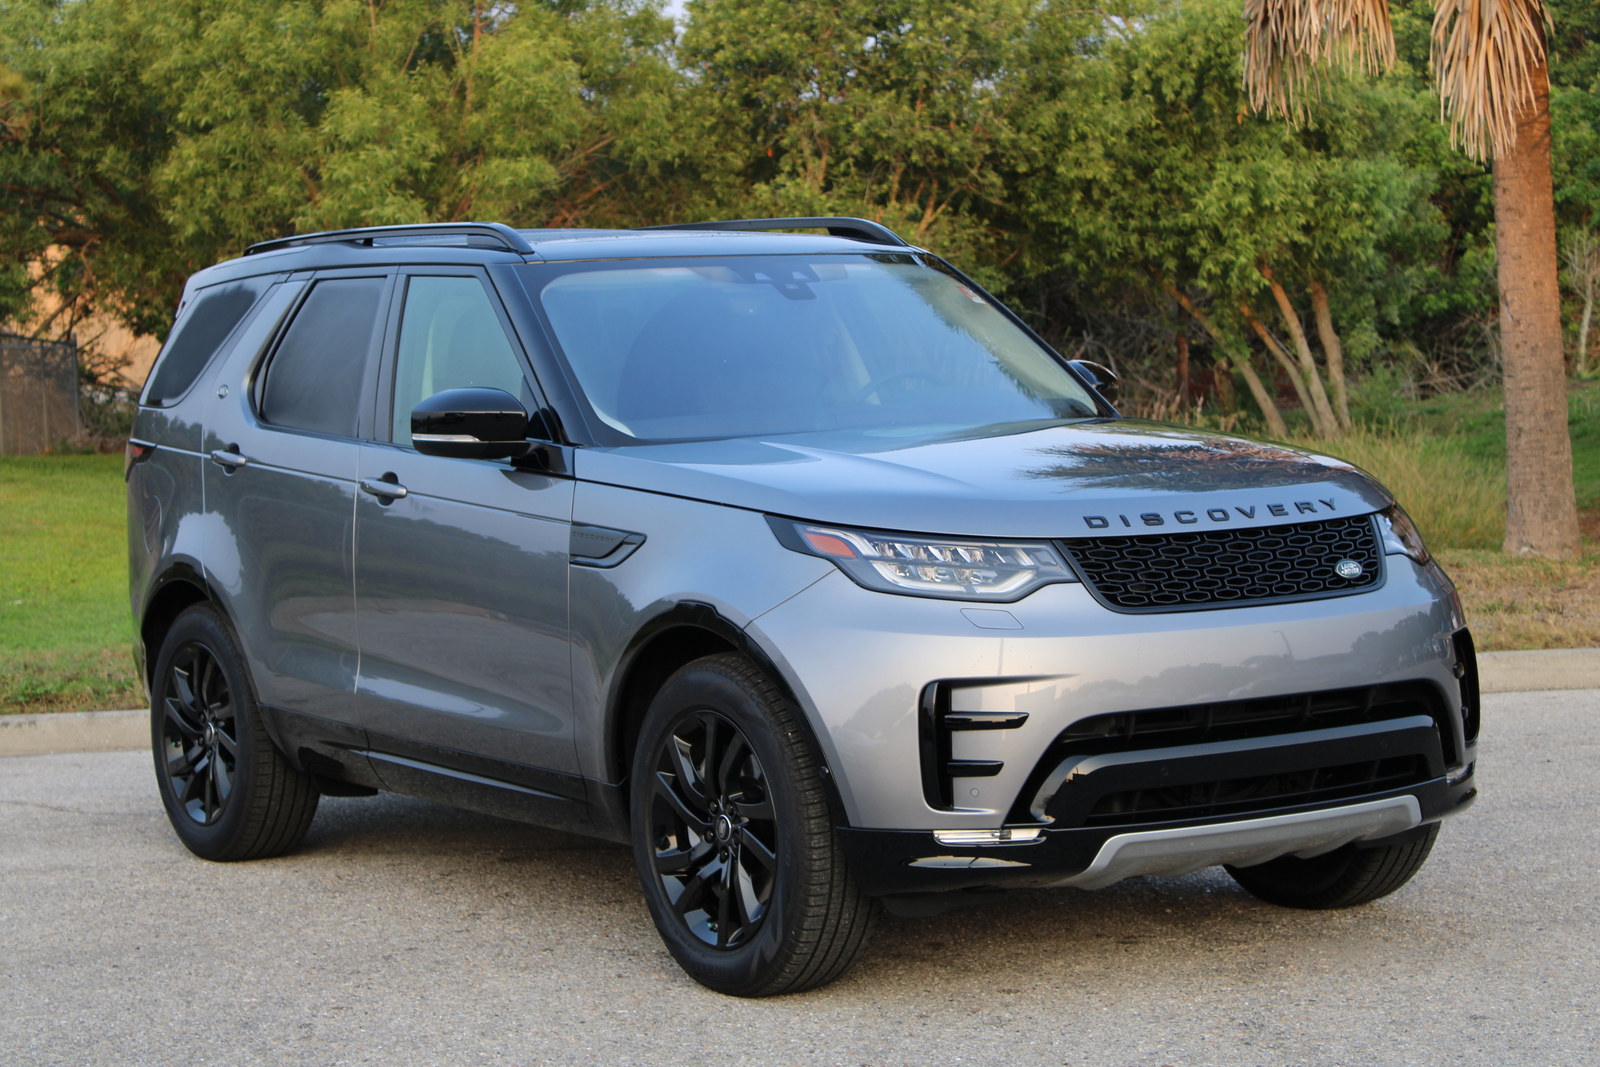 PreOwned 2020 Land Rover Discovery Landmark Edition Sport